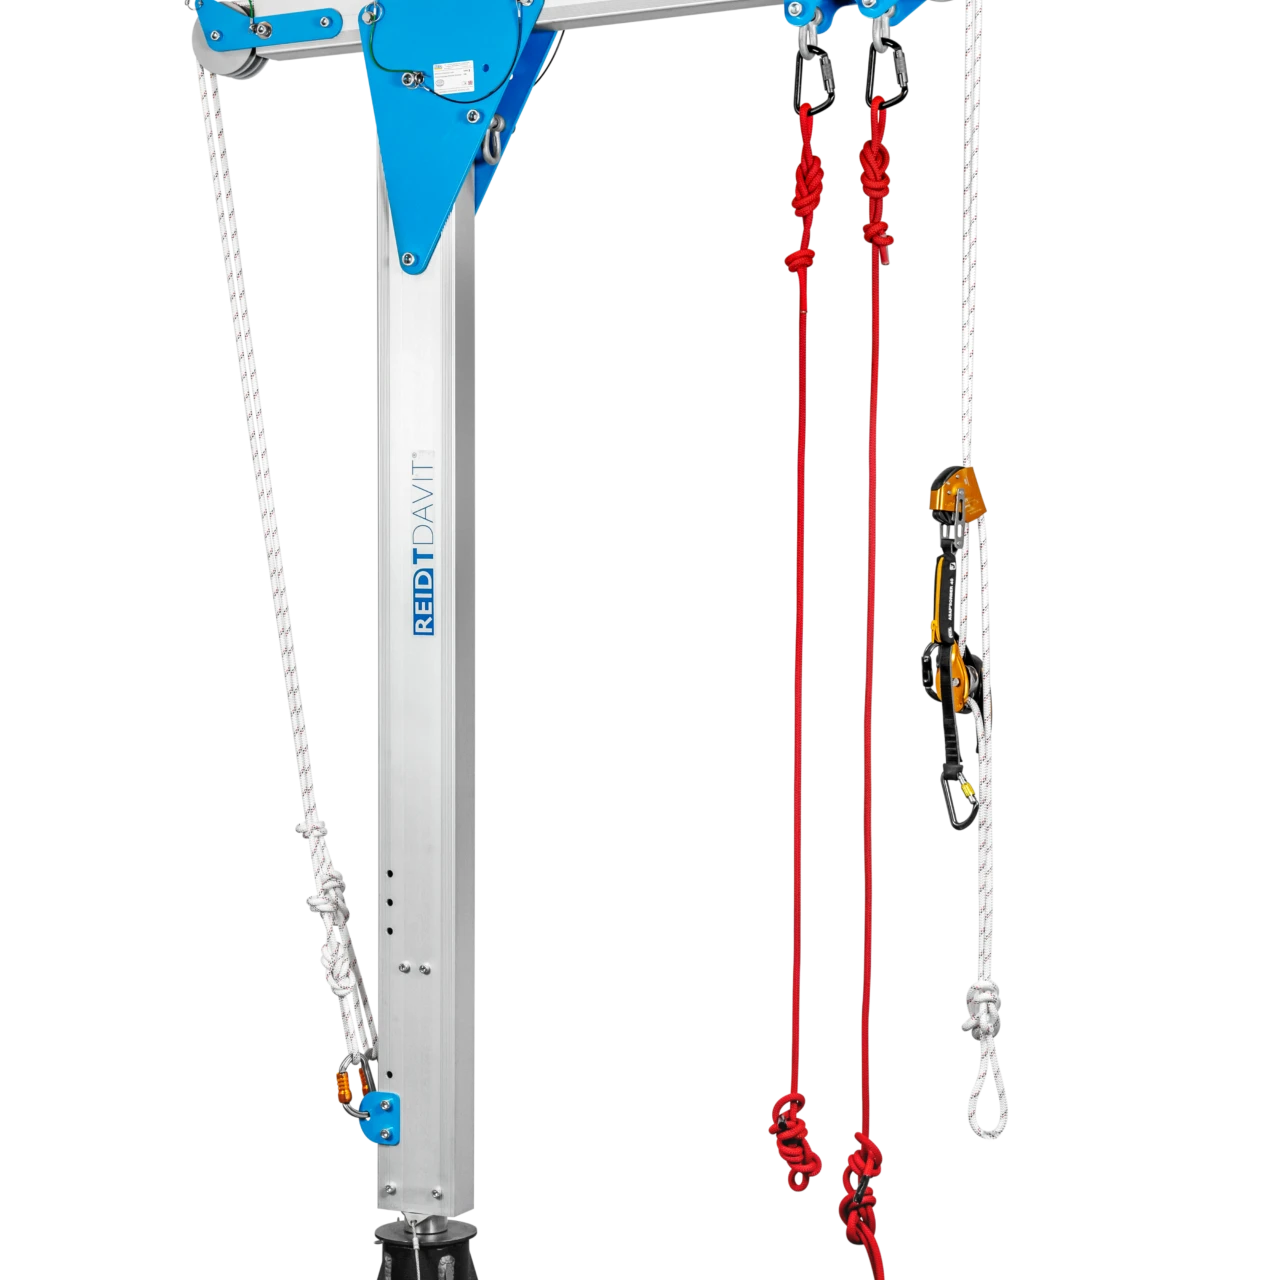 Davit system for rope access